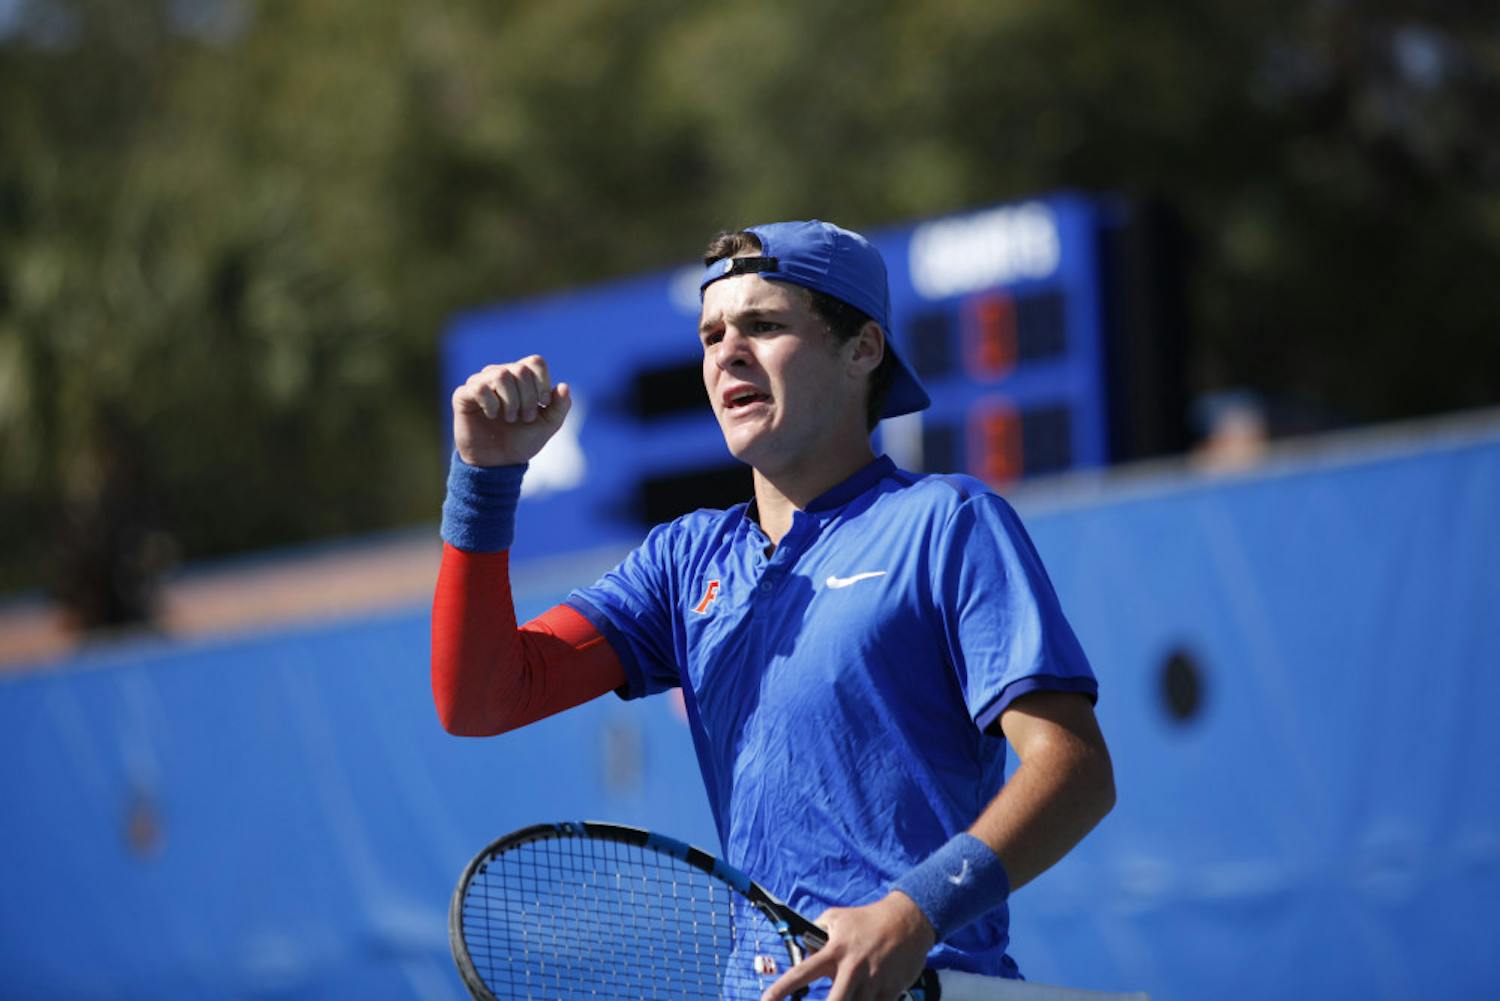 Junior McClain Kessler clinched the Round of 16 match for Florida over Ole Miss on Friday night, sending the Gators to the NCAA Quarterfinals.